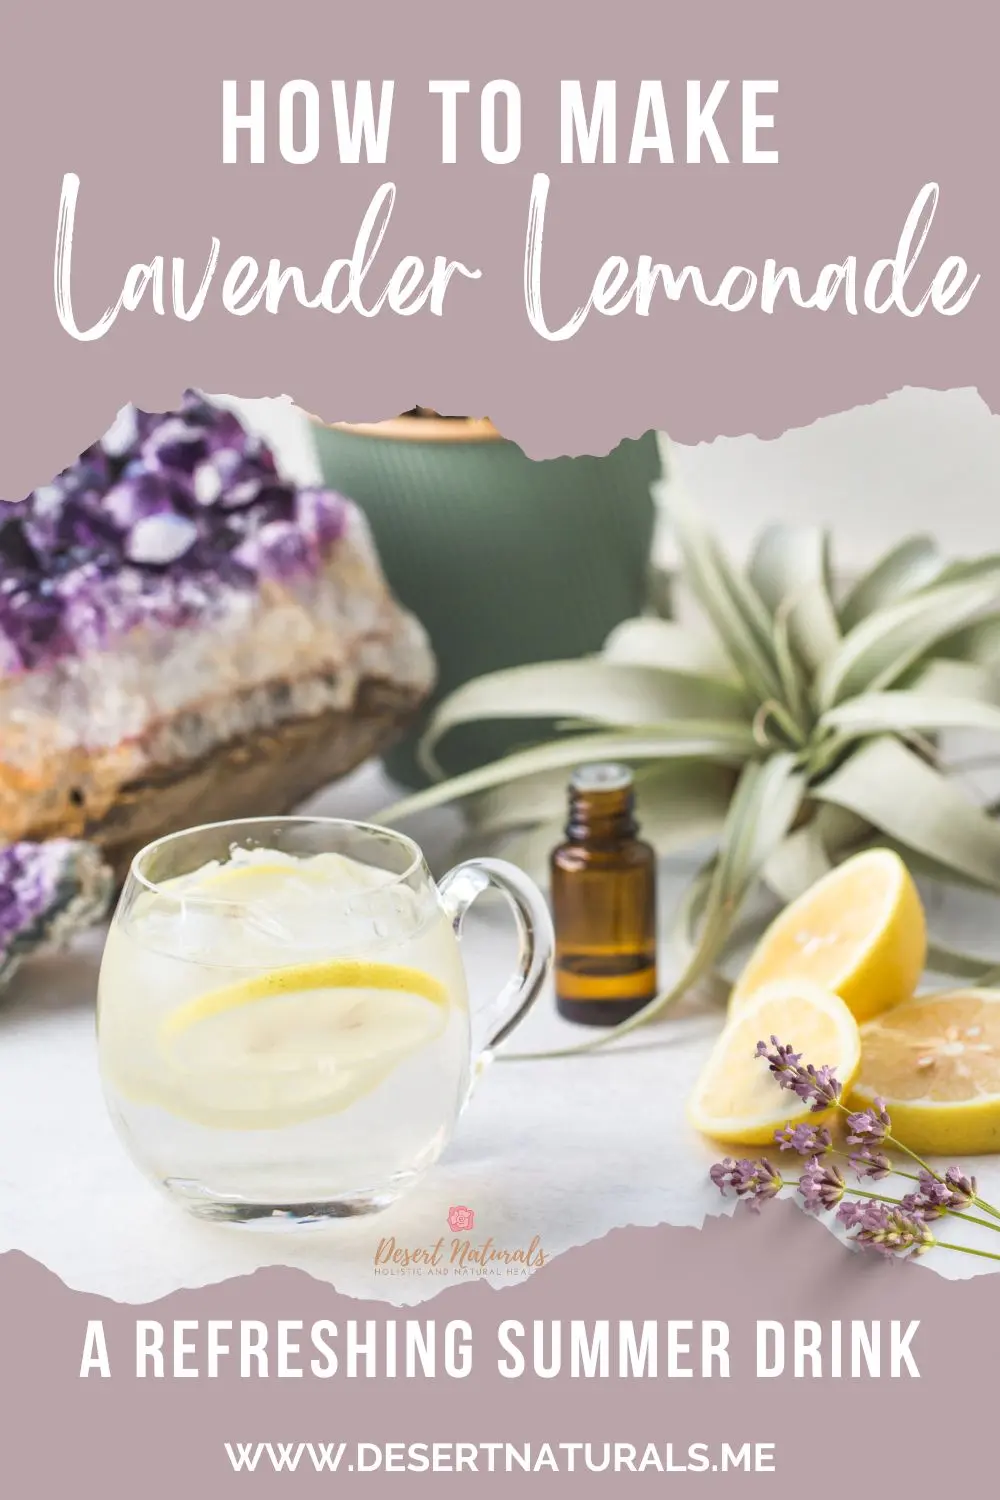 how to make lavender lemonade with crystal, lavender, and essential oil pinterest pin